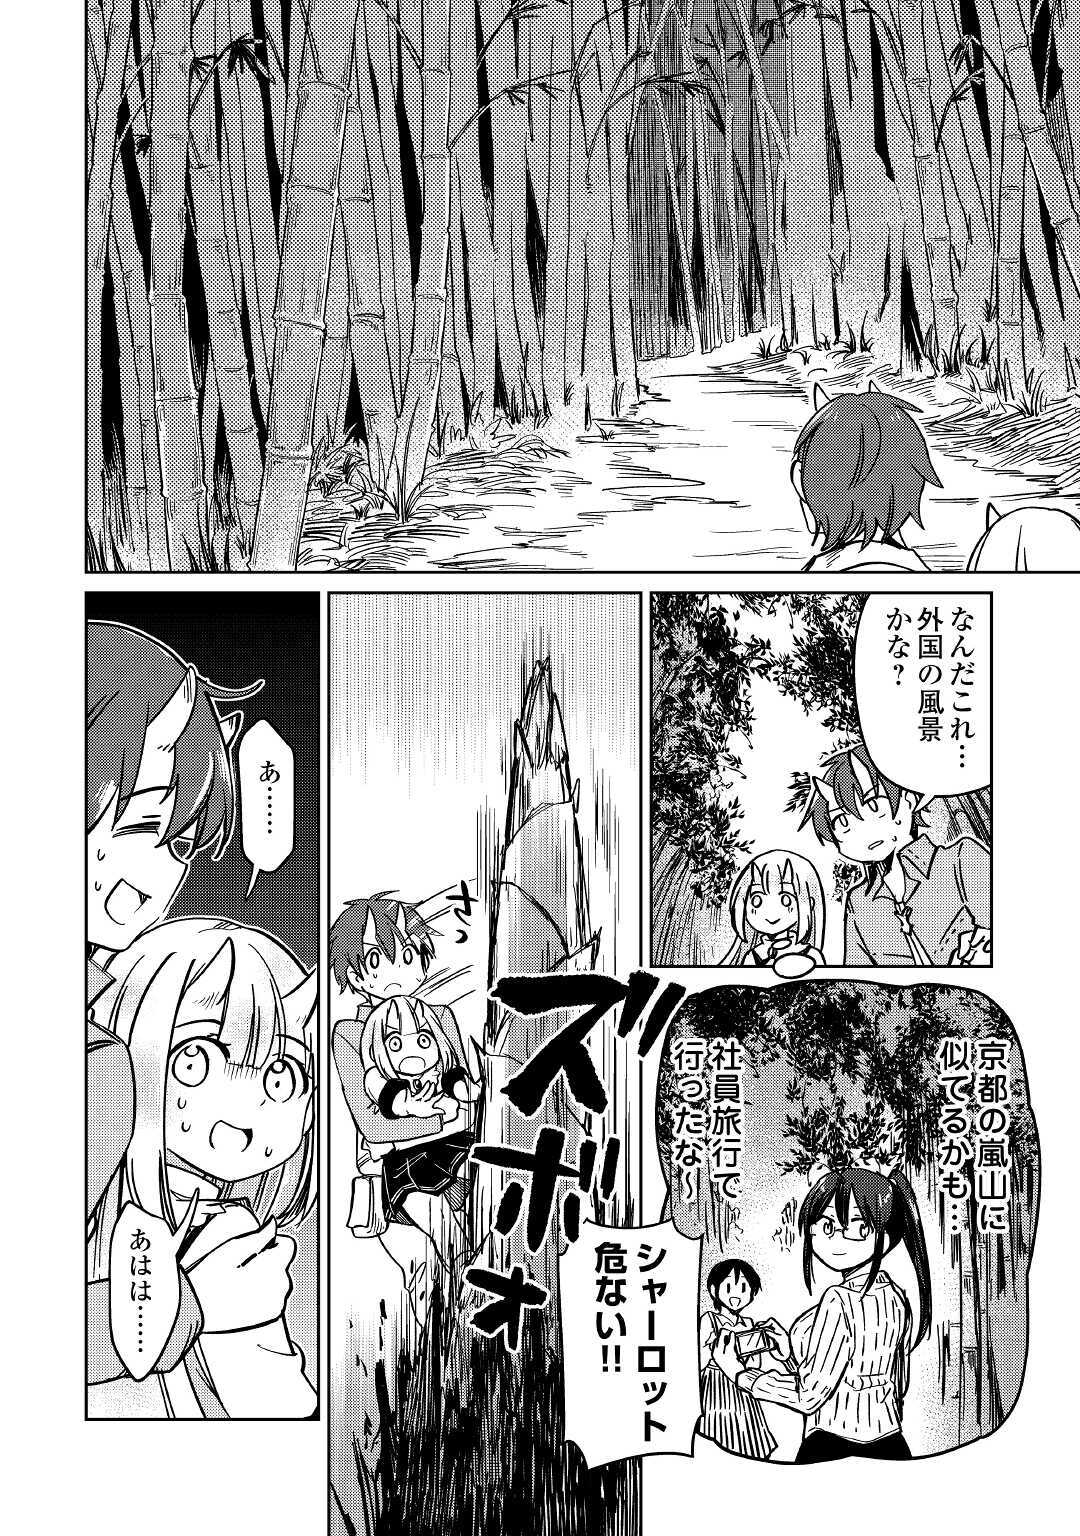 The Former Structural Researcher’s Story of Otherworldly Adventure 第29話 - Page 14